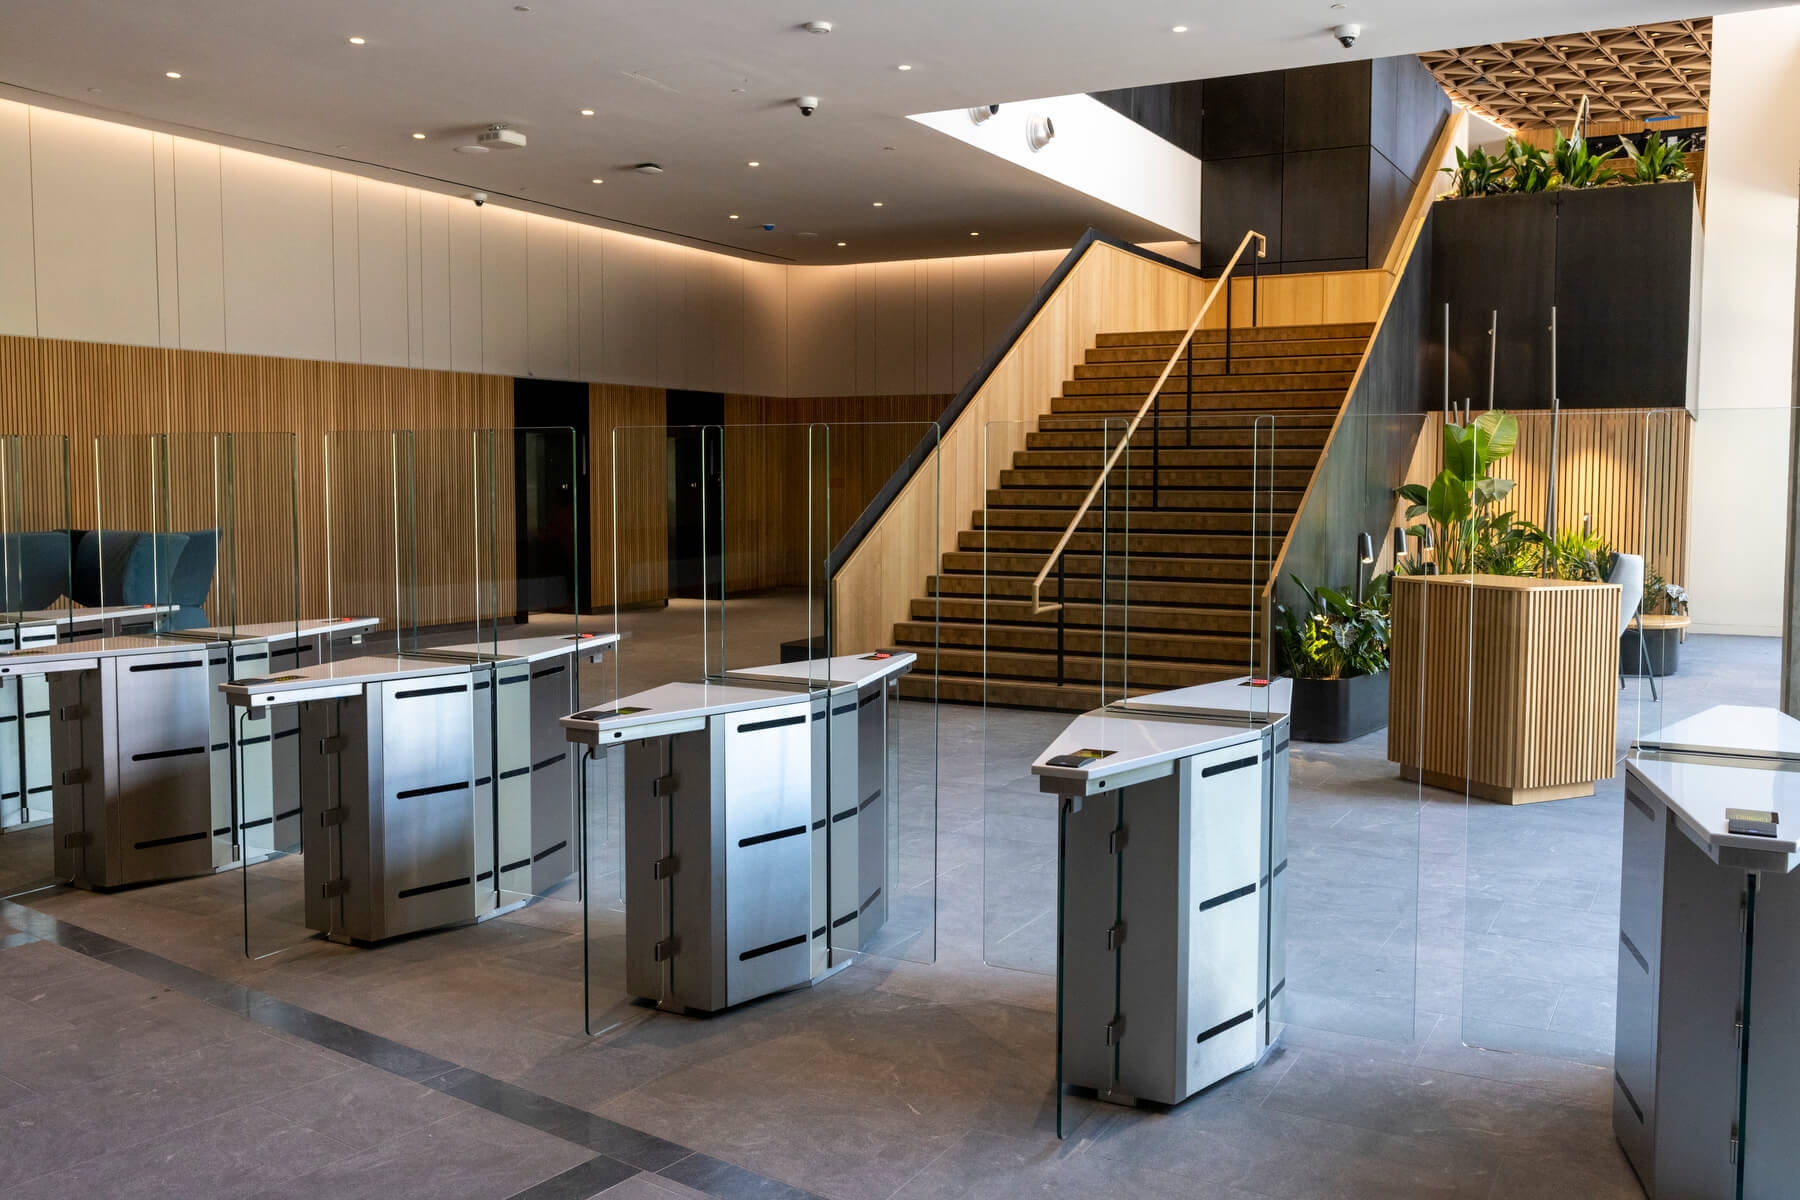 An image of turnstiles in the front lobby of Amazon's second headquarters 